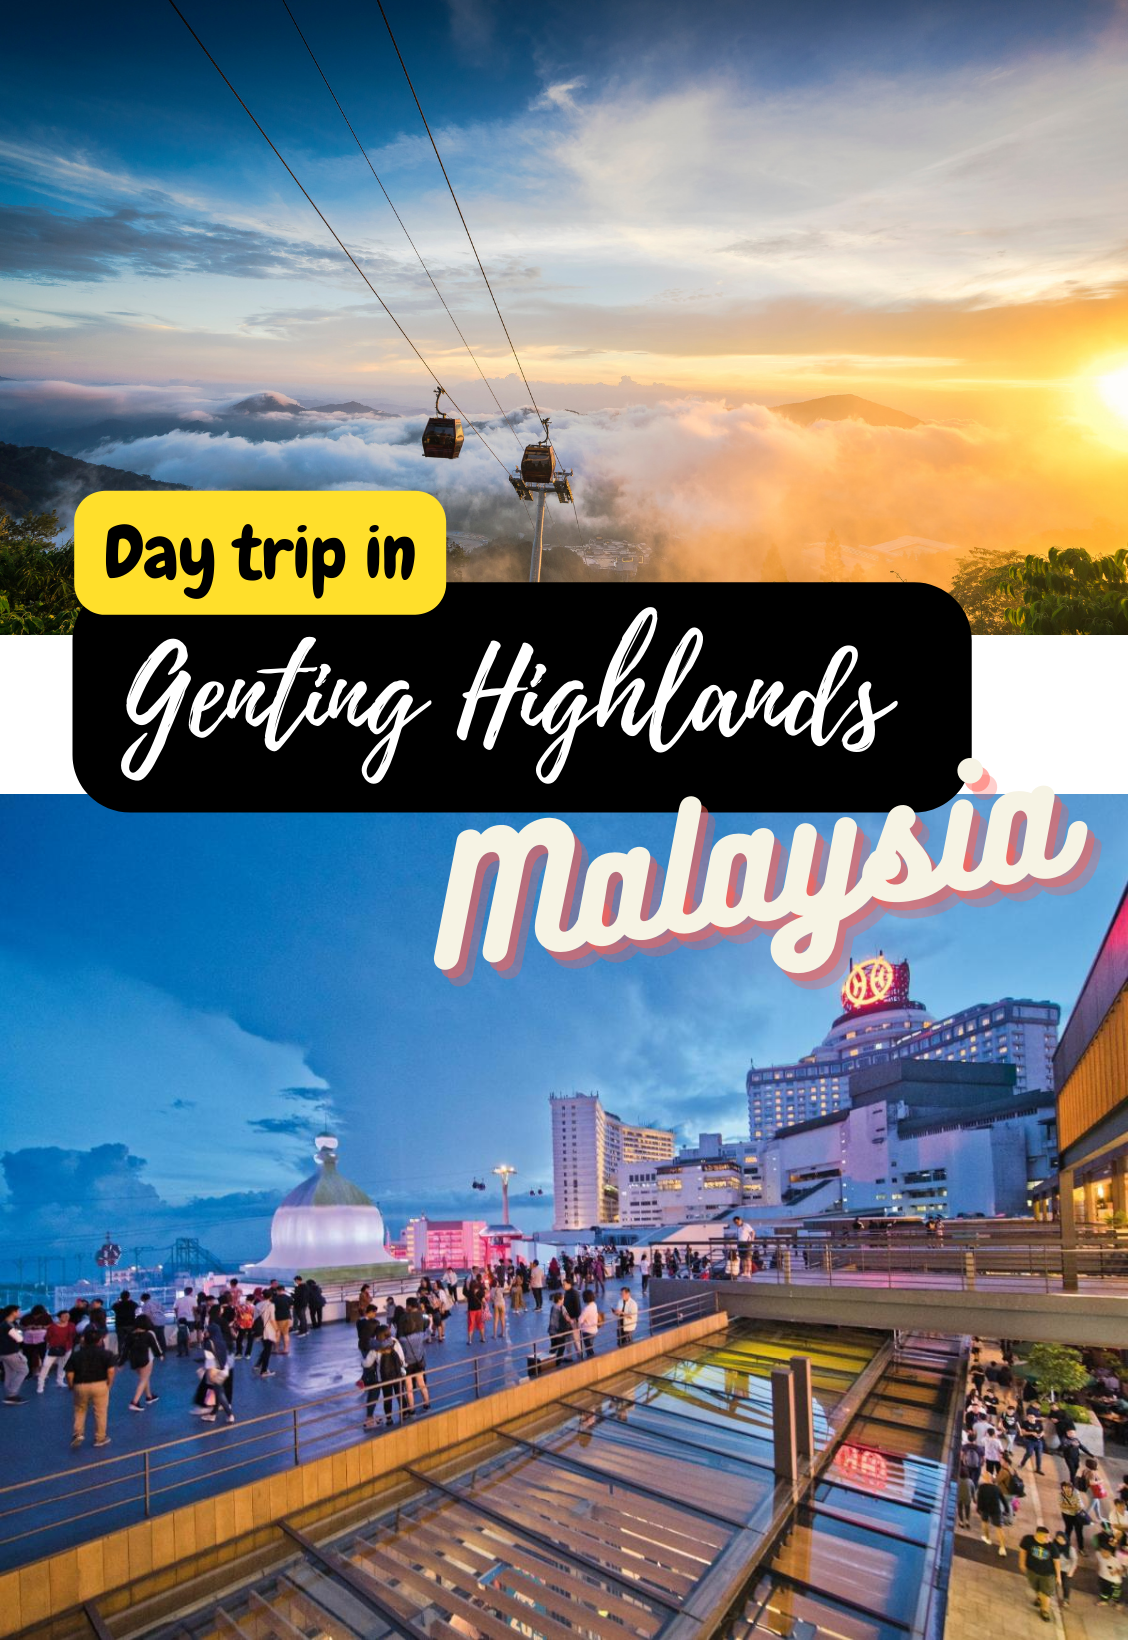 Day trip in Genting Highlands - Malaysia